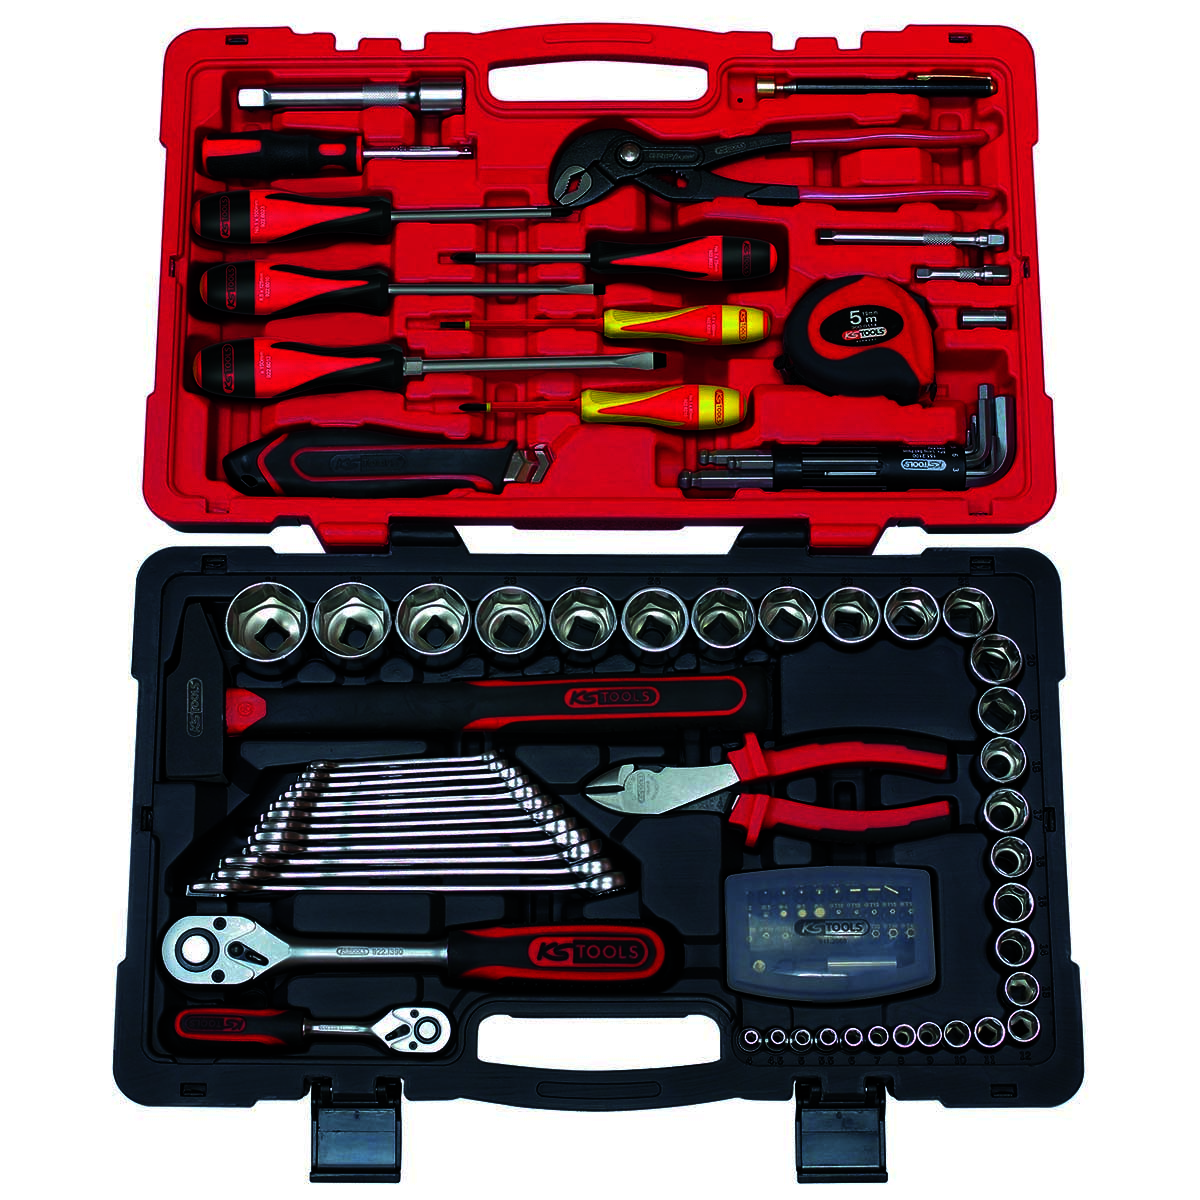 Coffret Outillage Ultimate 922.0701-A1, Ks-tools